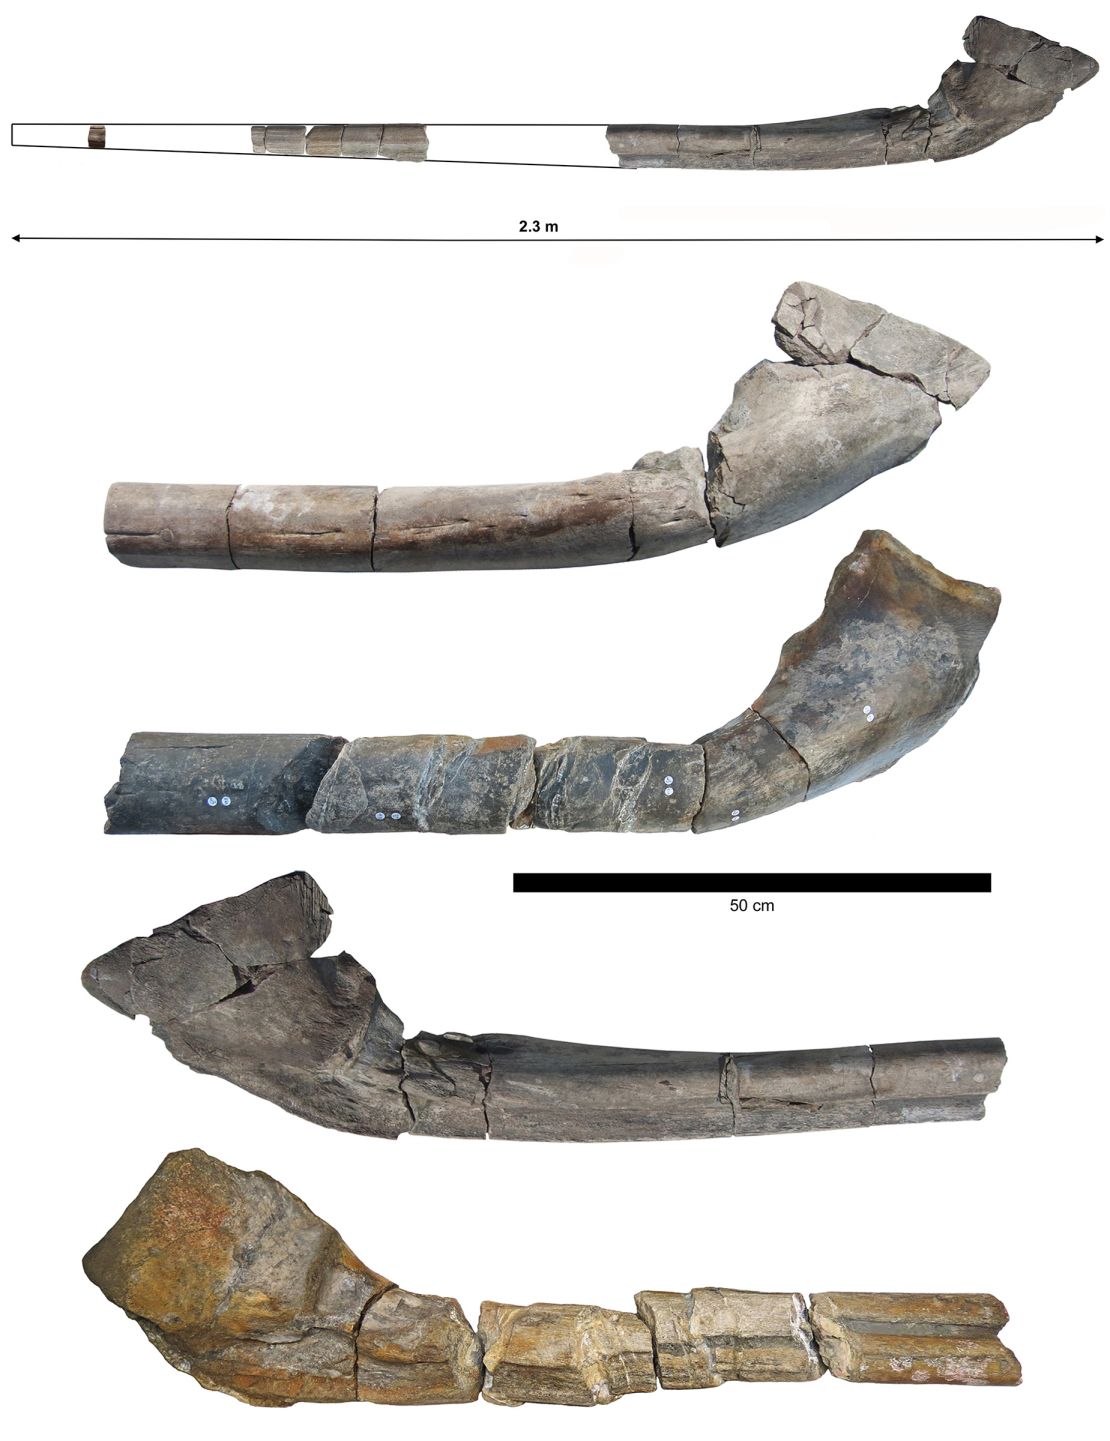 The nearly complete giant jawbone is shown along with the jawbone (middle and bottom) found by Paul de la Salle in 2016.